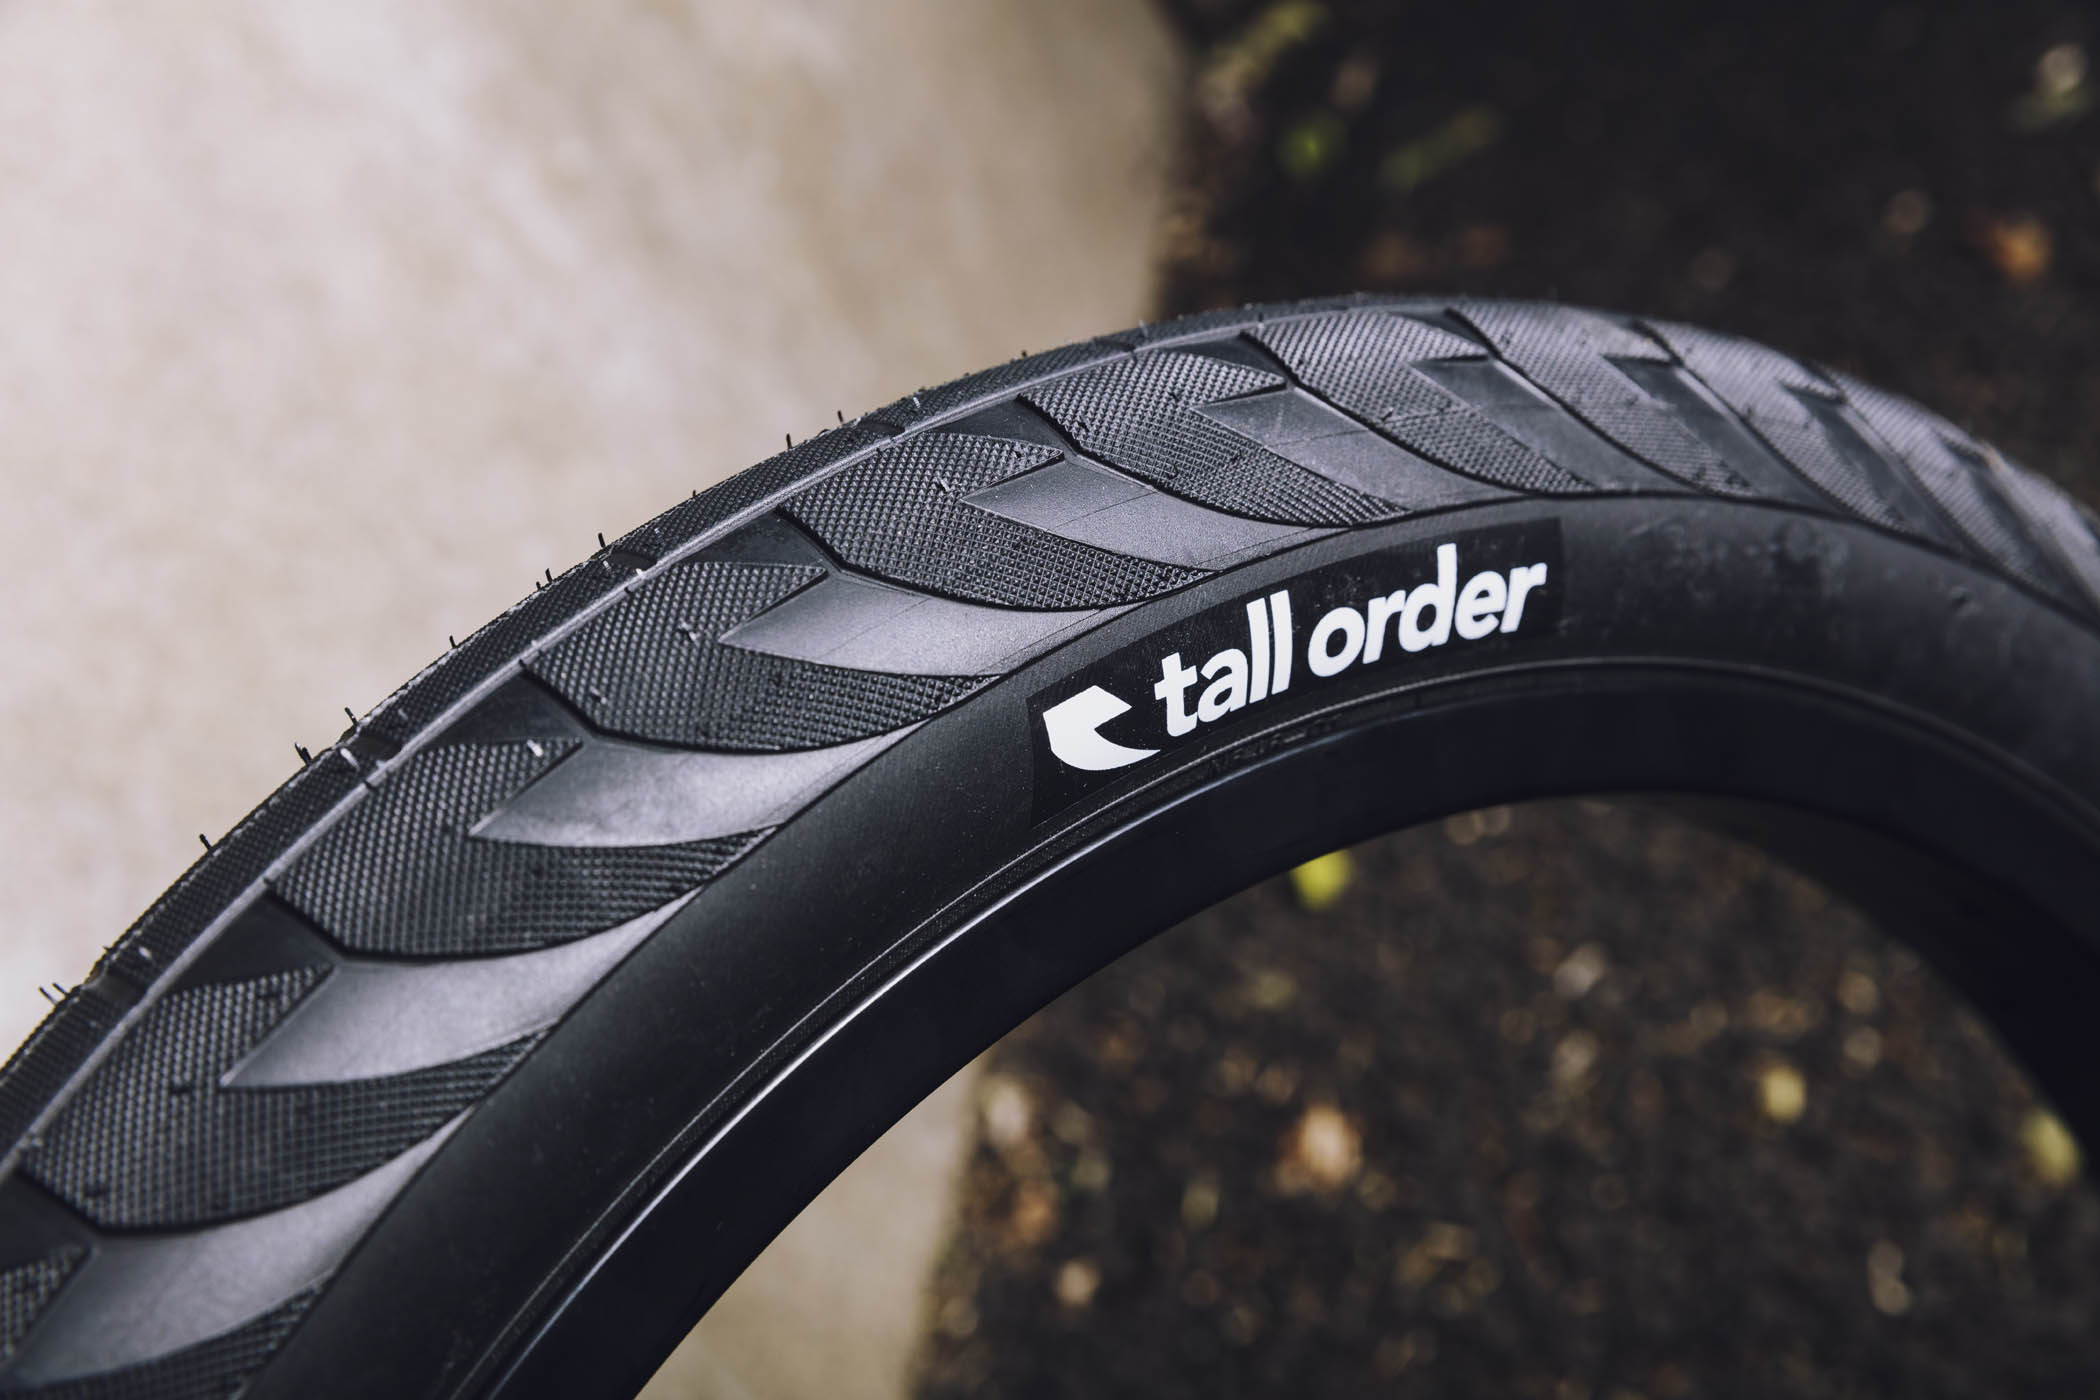 TALL ORDER WALLRIDE TYRE – REVIEW